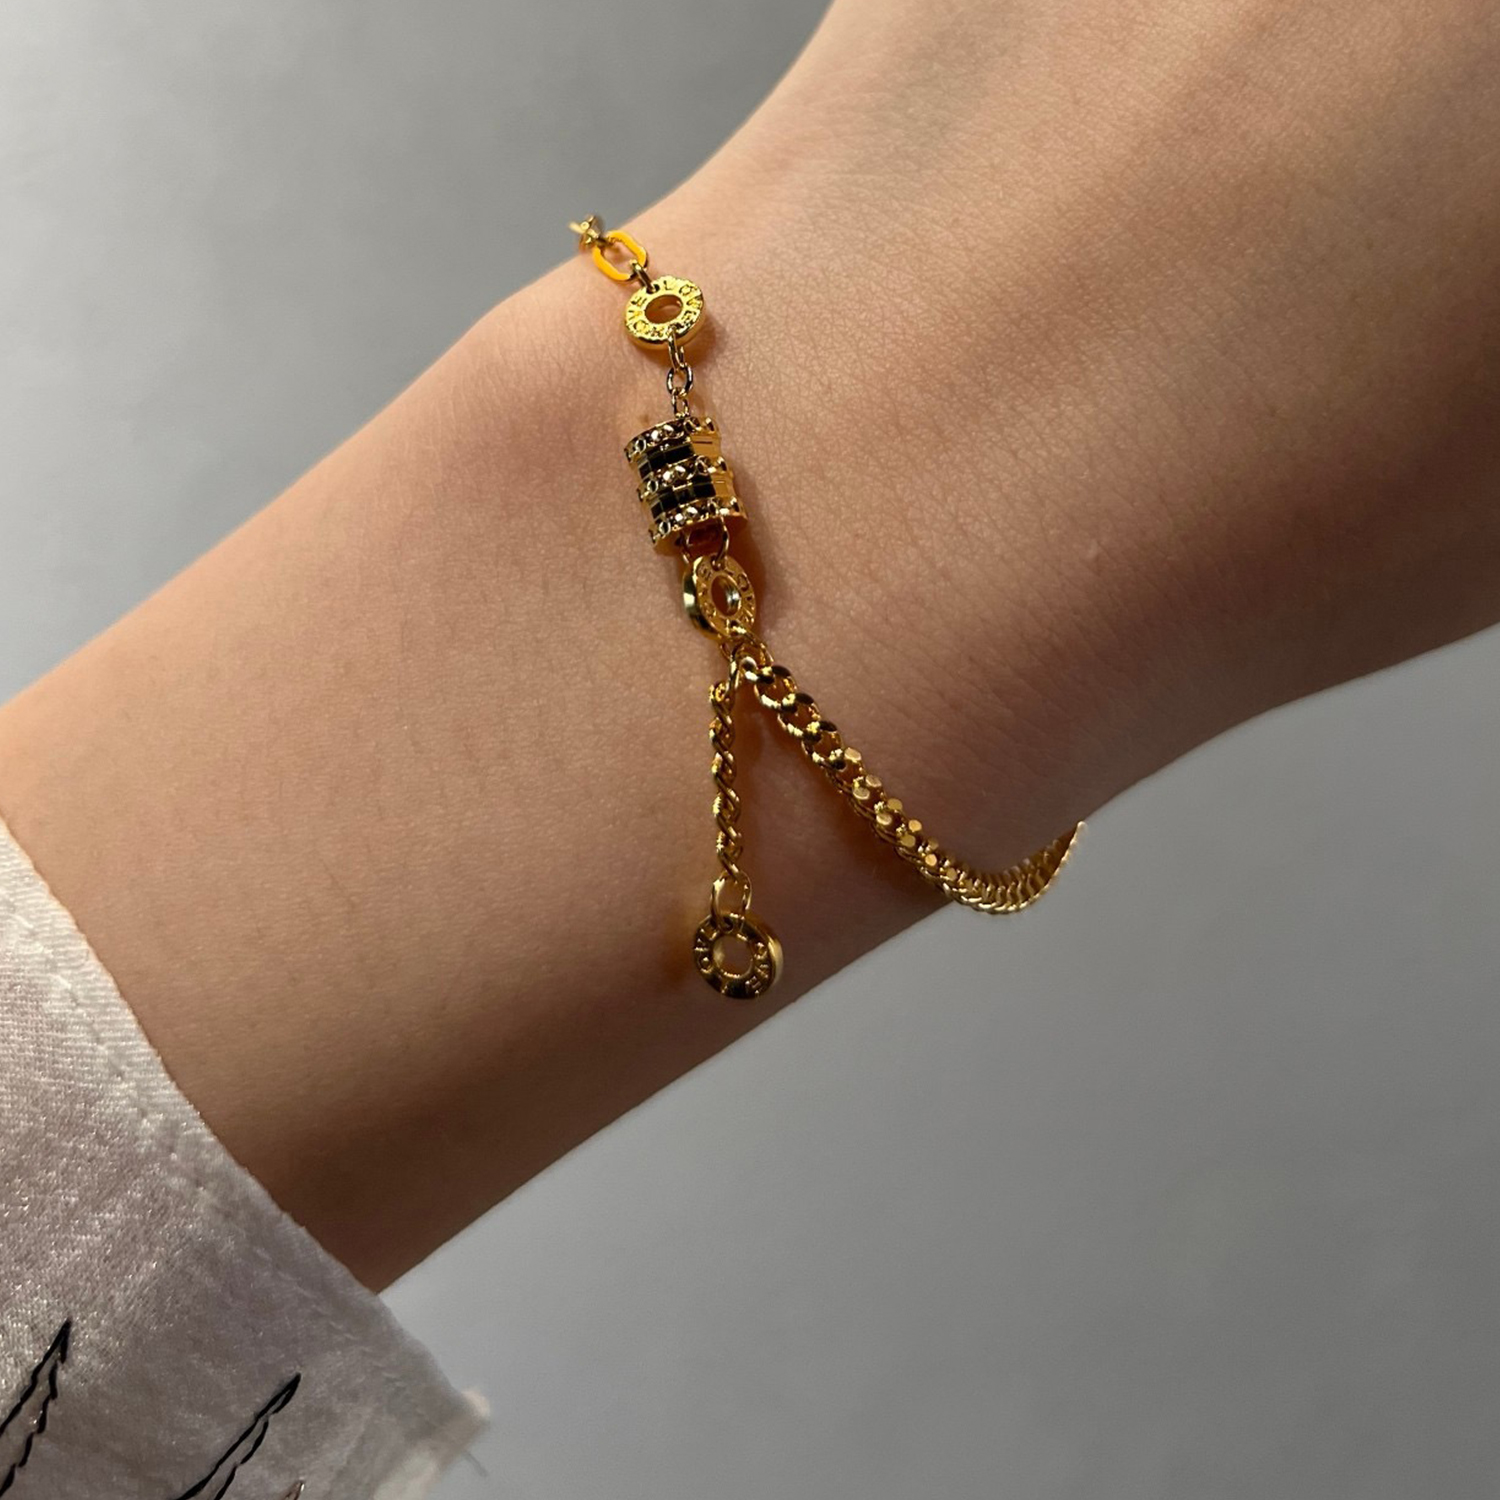 Alluvial Gold Vacuum Electroplating 24K Gold AB Chain Small Waist Bracelet